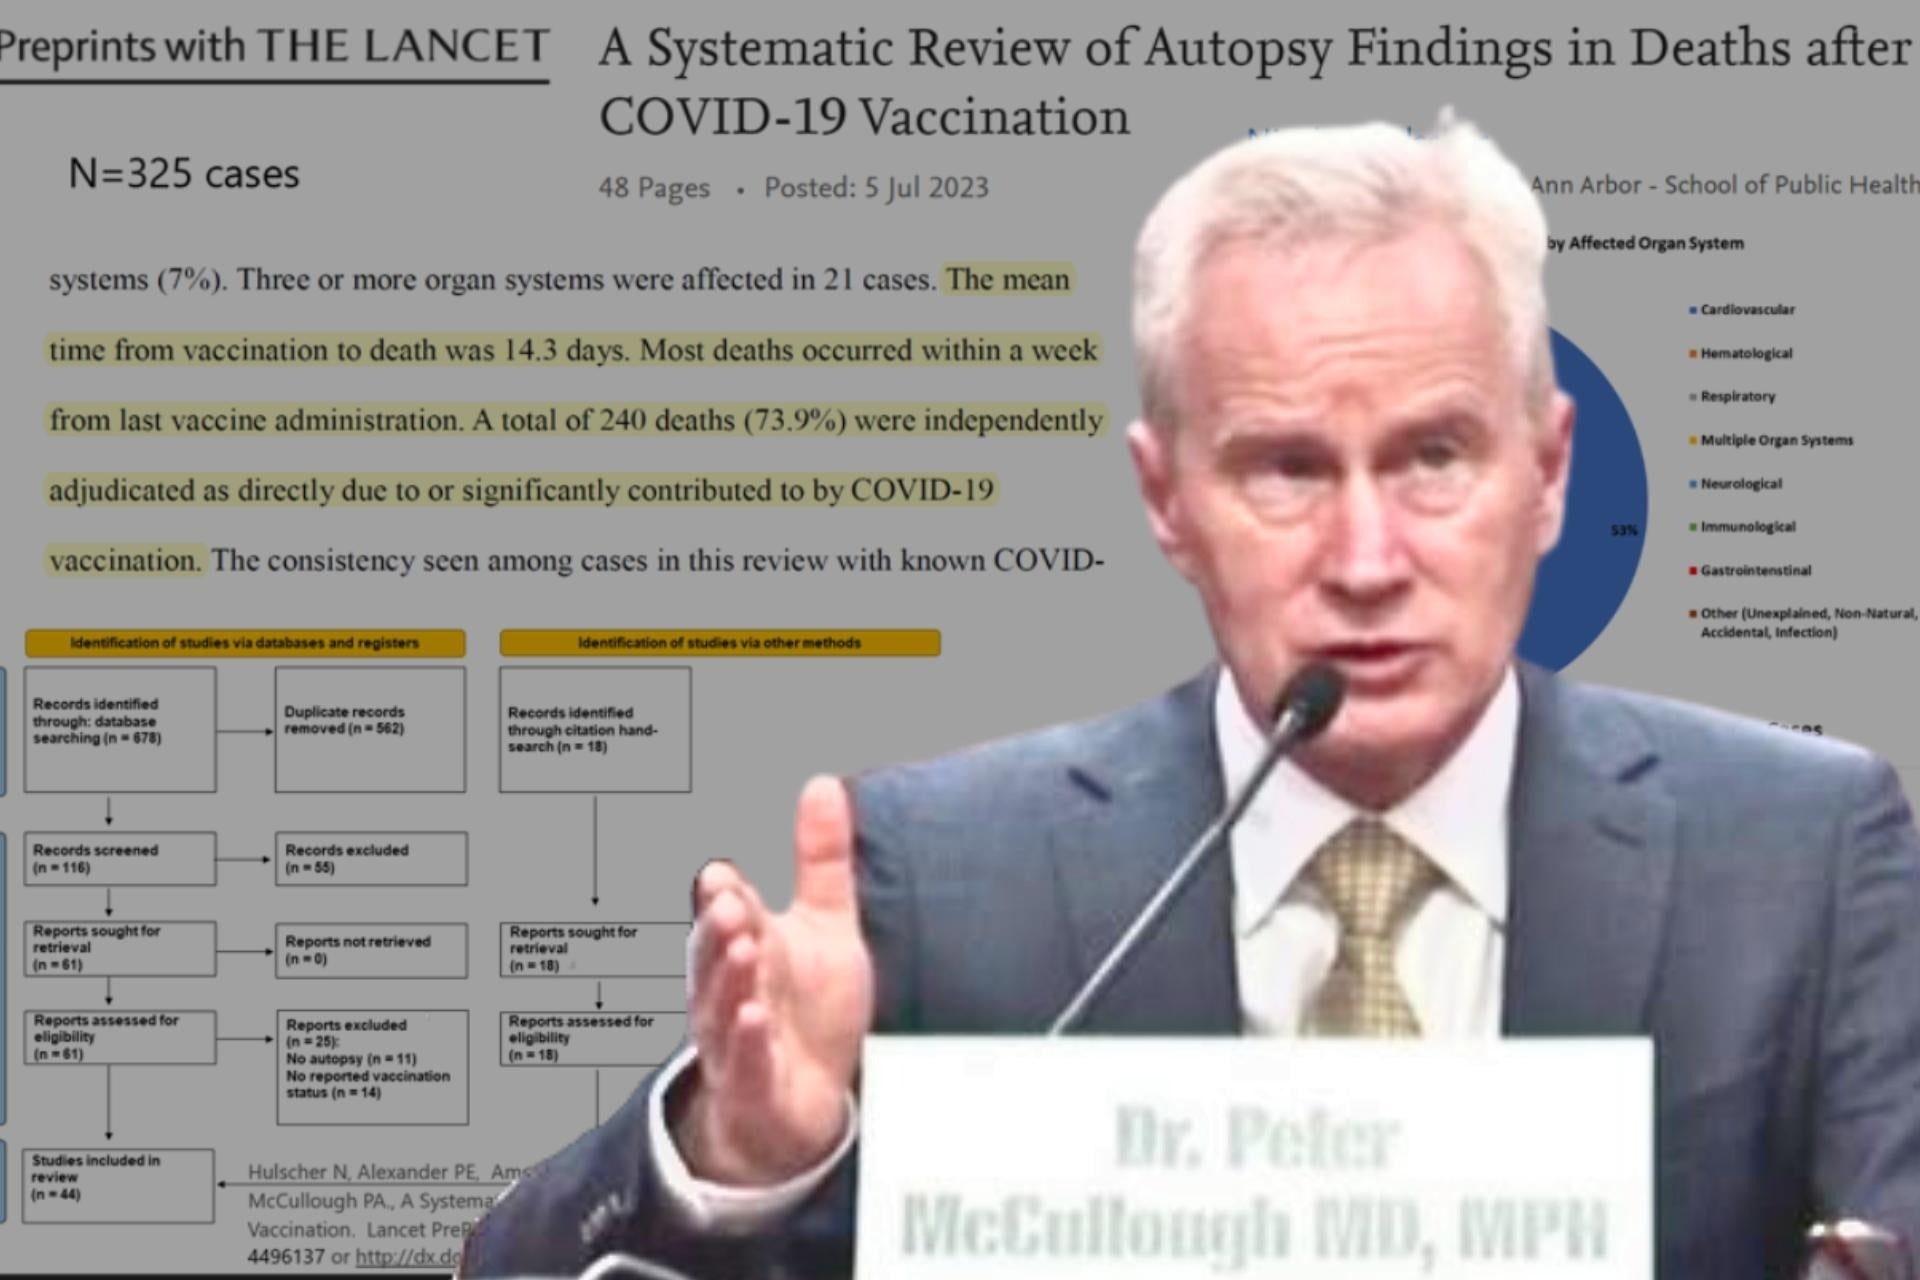 Dr. McCullough Uncovers Smoking Gun: Autopsies Found 74% of deaths related to mRNA vaccination